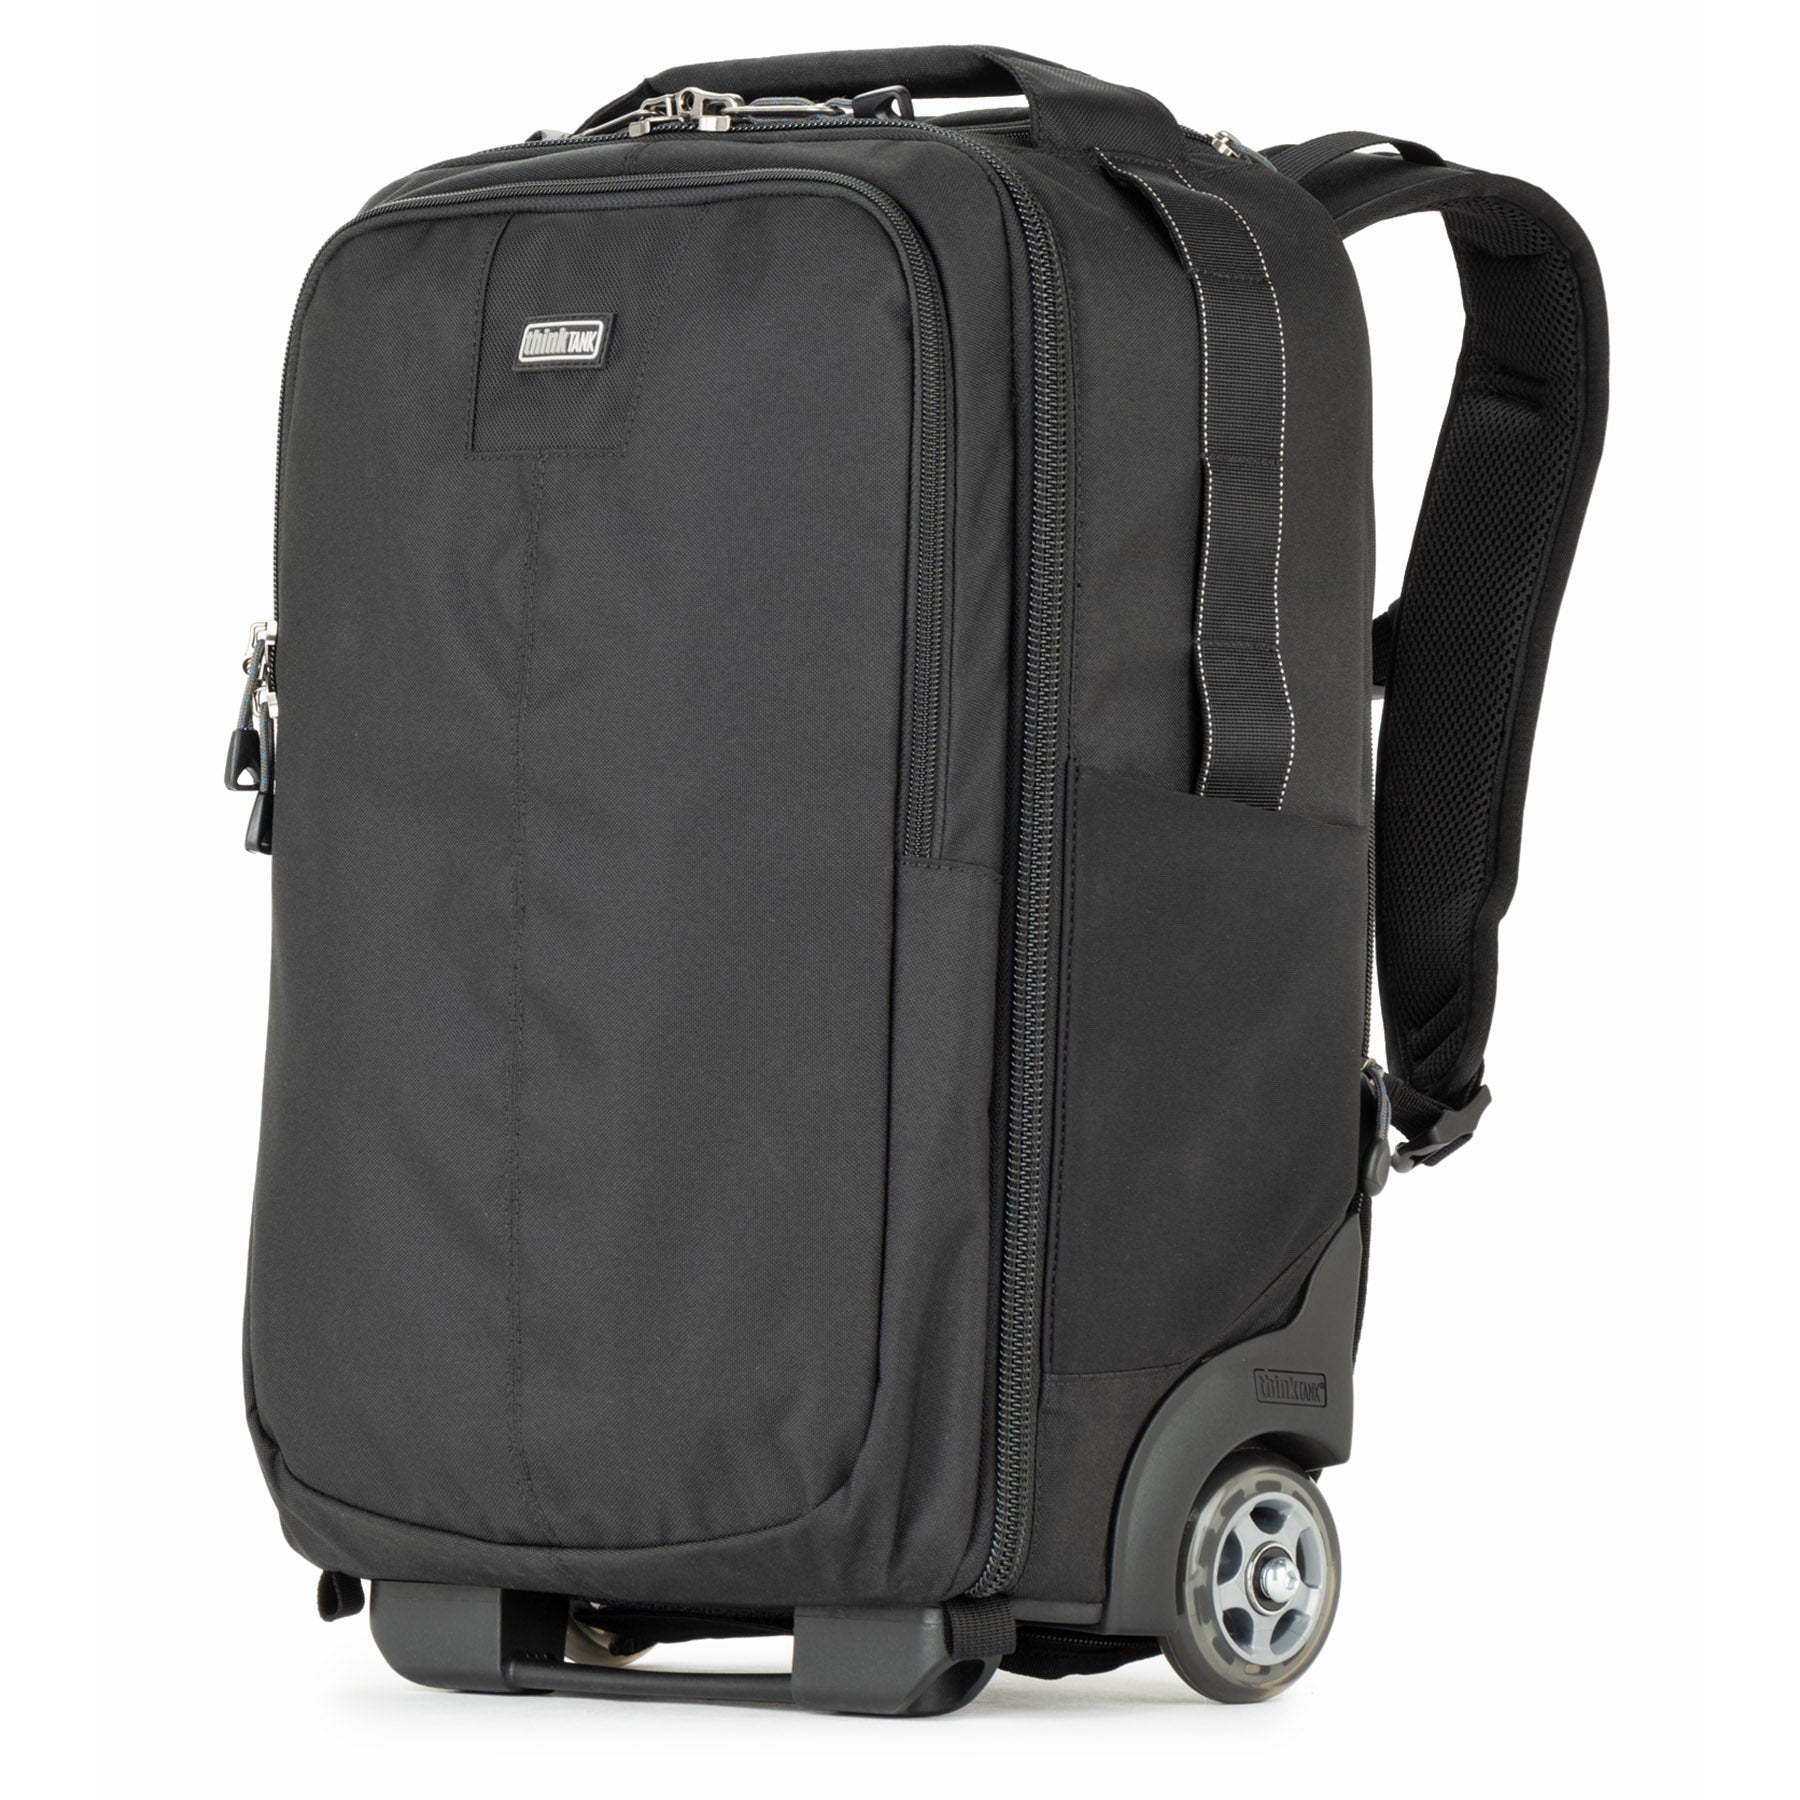 Specially designed interior to maximize camera gear for carry-on, meeting most U.S. and International airline carry-on requirements - check airline